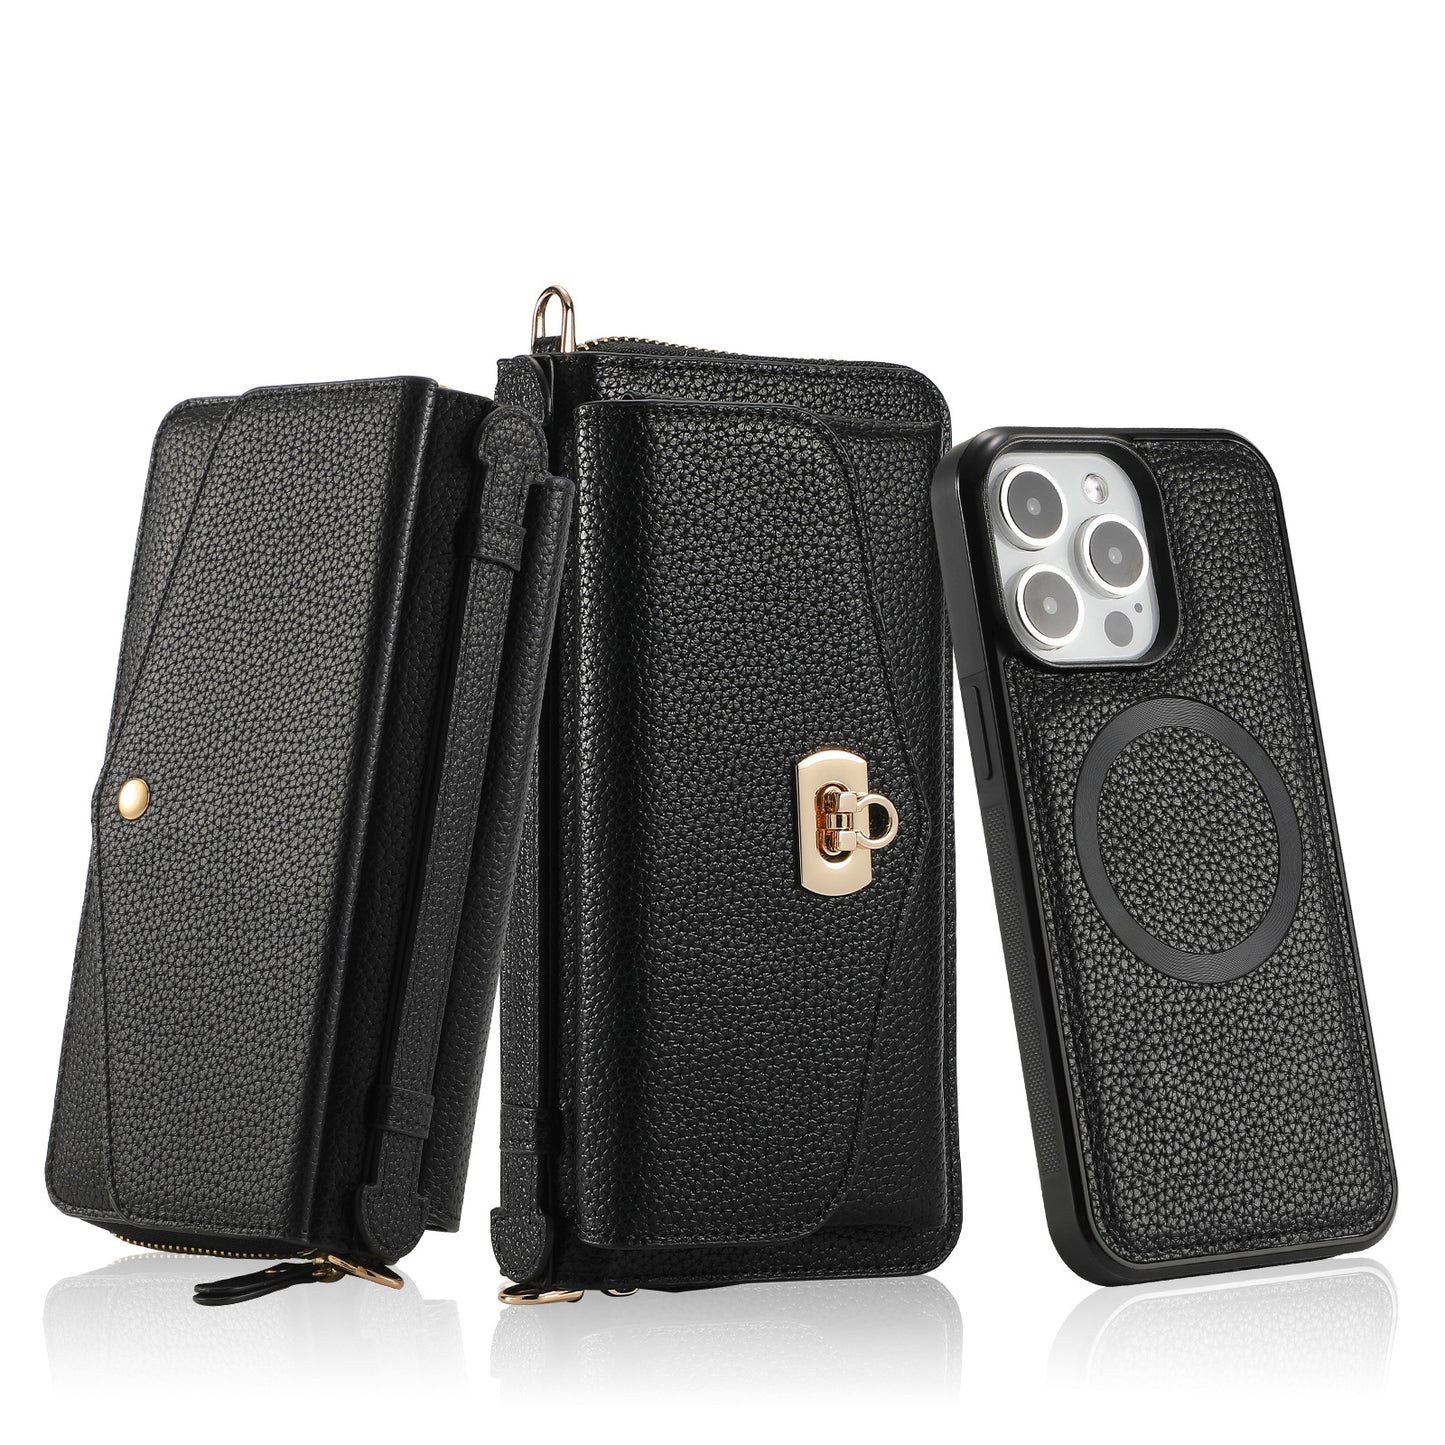 2 in 1 Removable Zip Card Solt Leather Wallet Case for iPhone